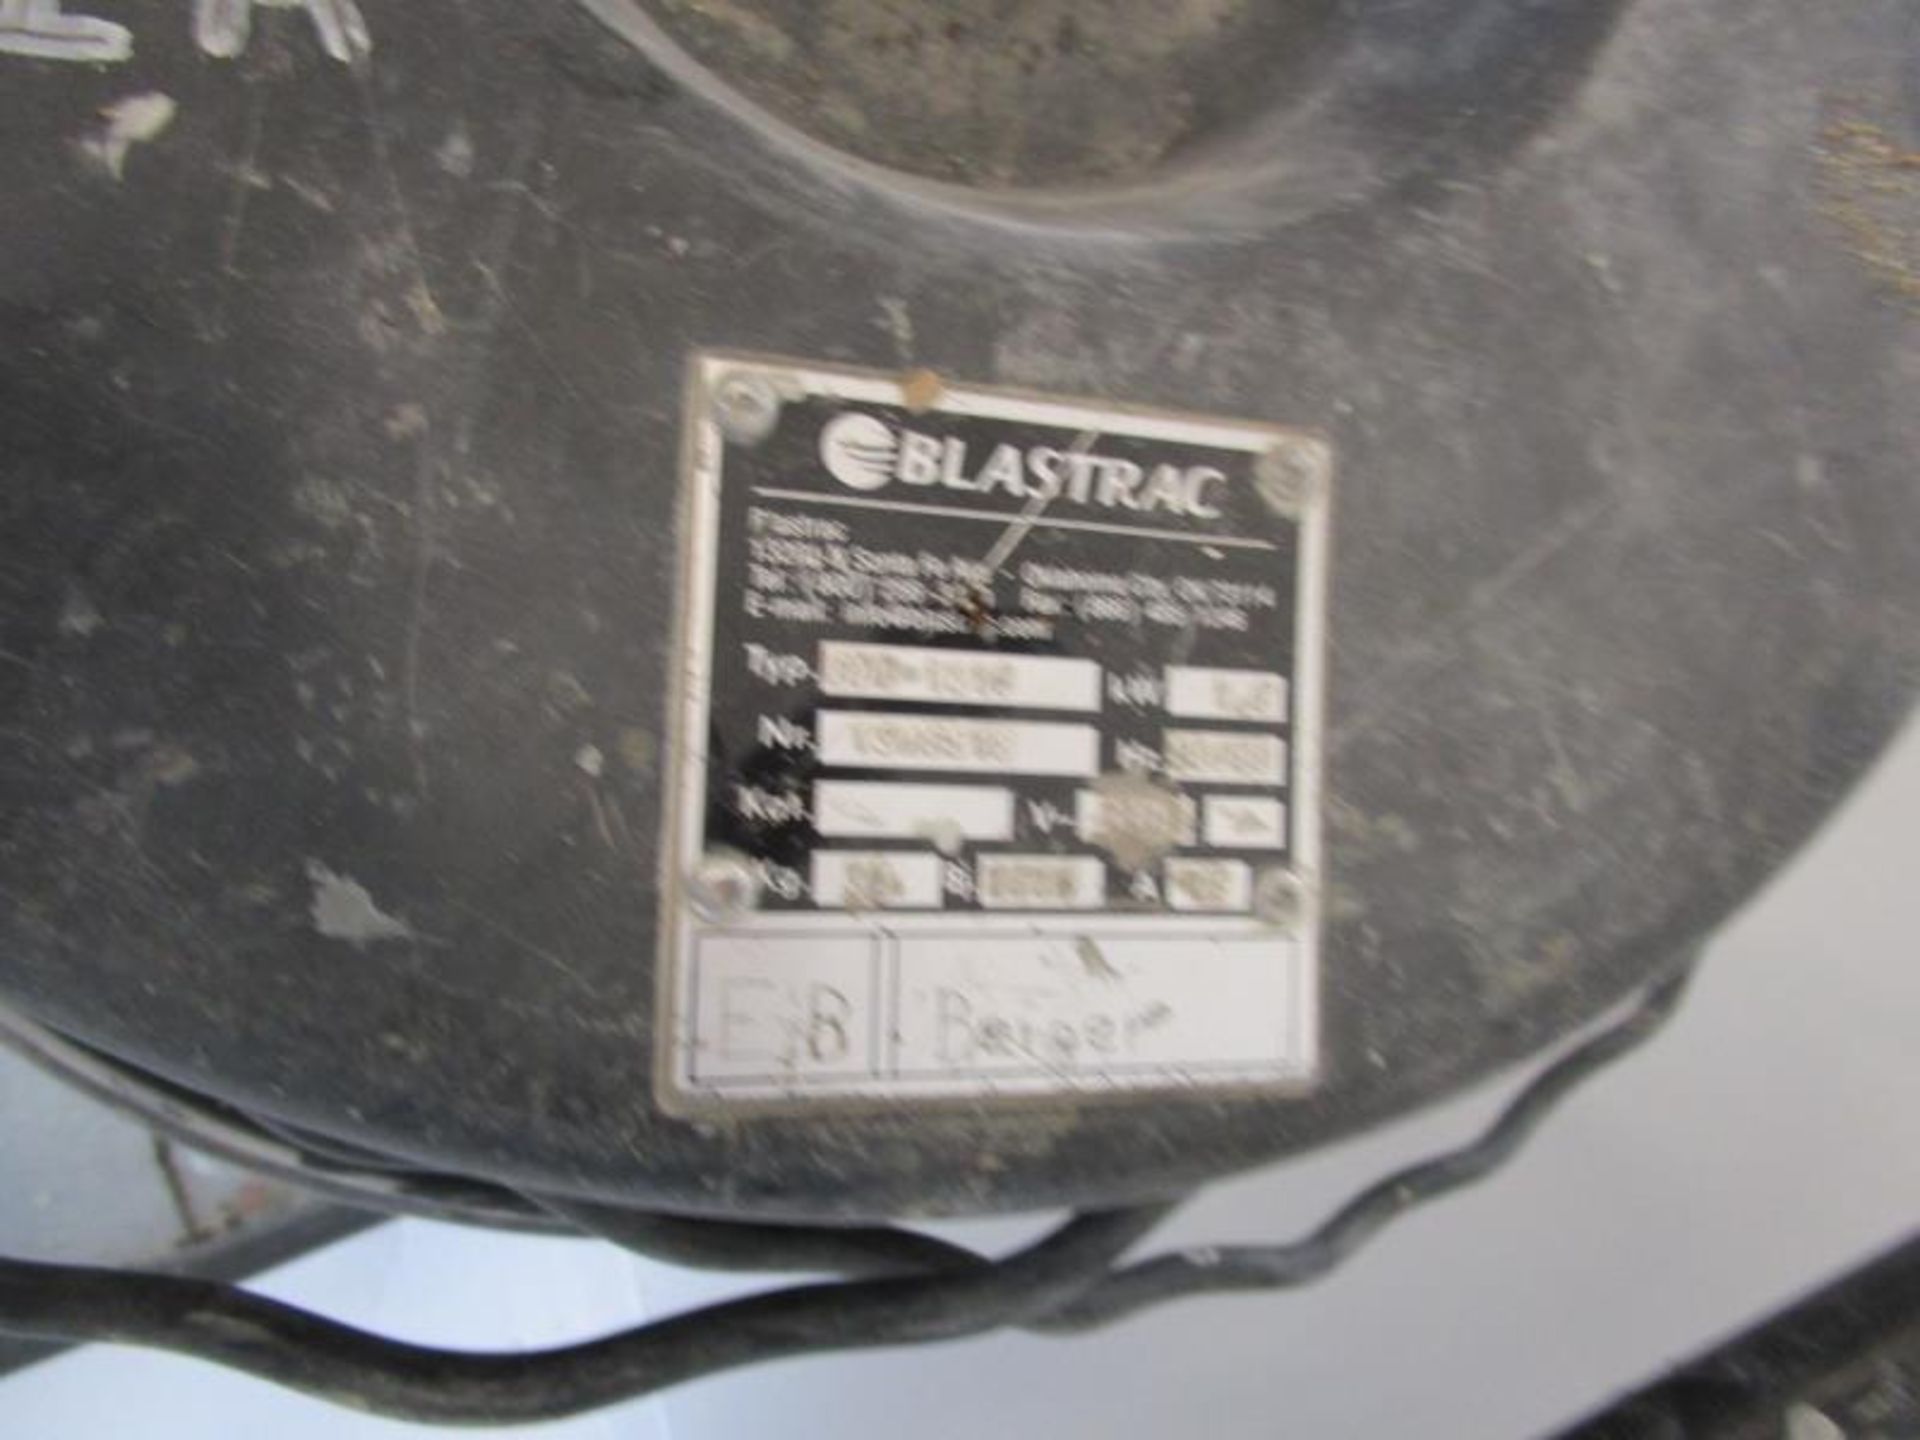 Blastrac 10.5 Gal. Compact Dust Collector, Model: BDC1216 - Image 2 of 4